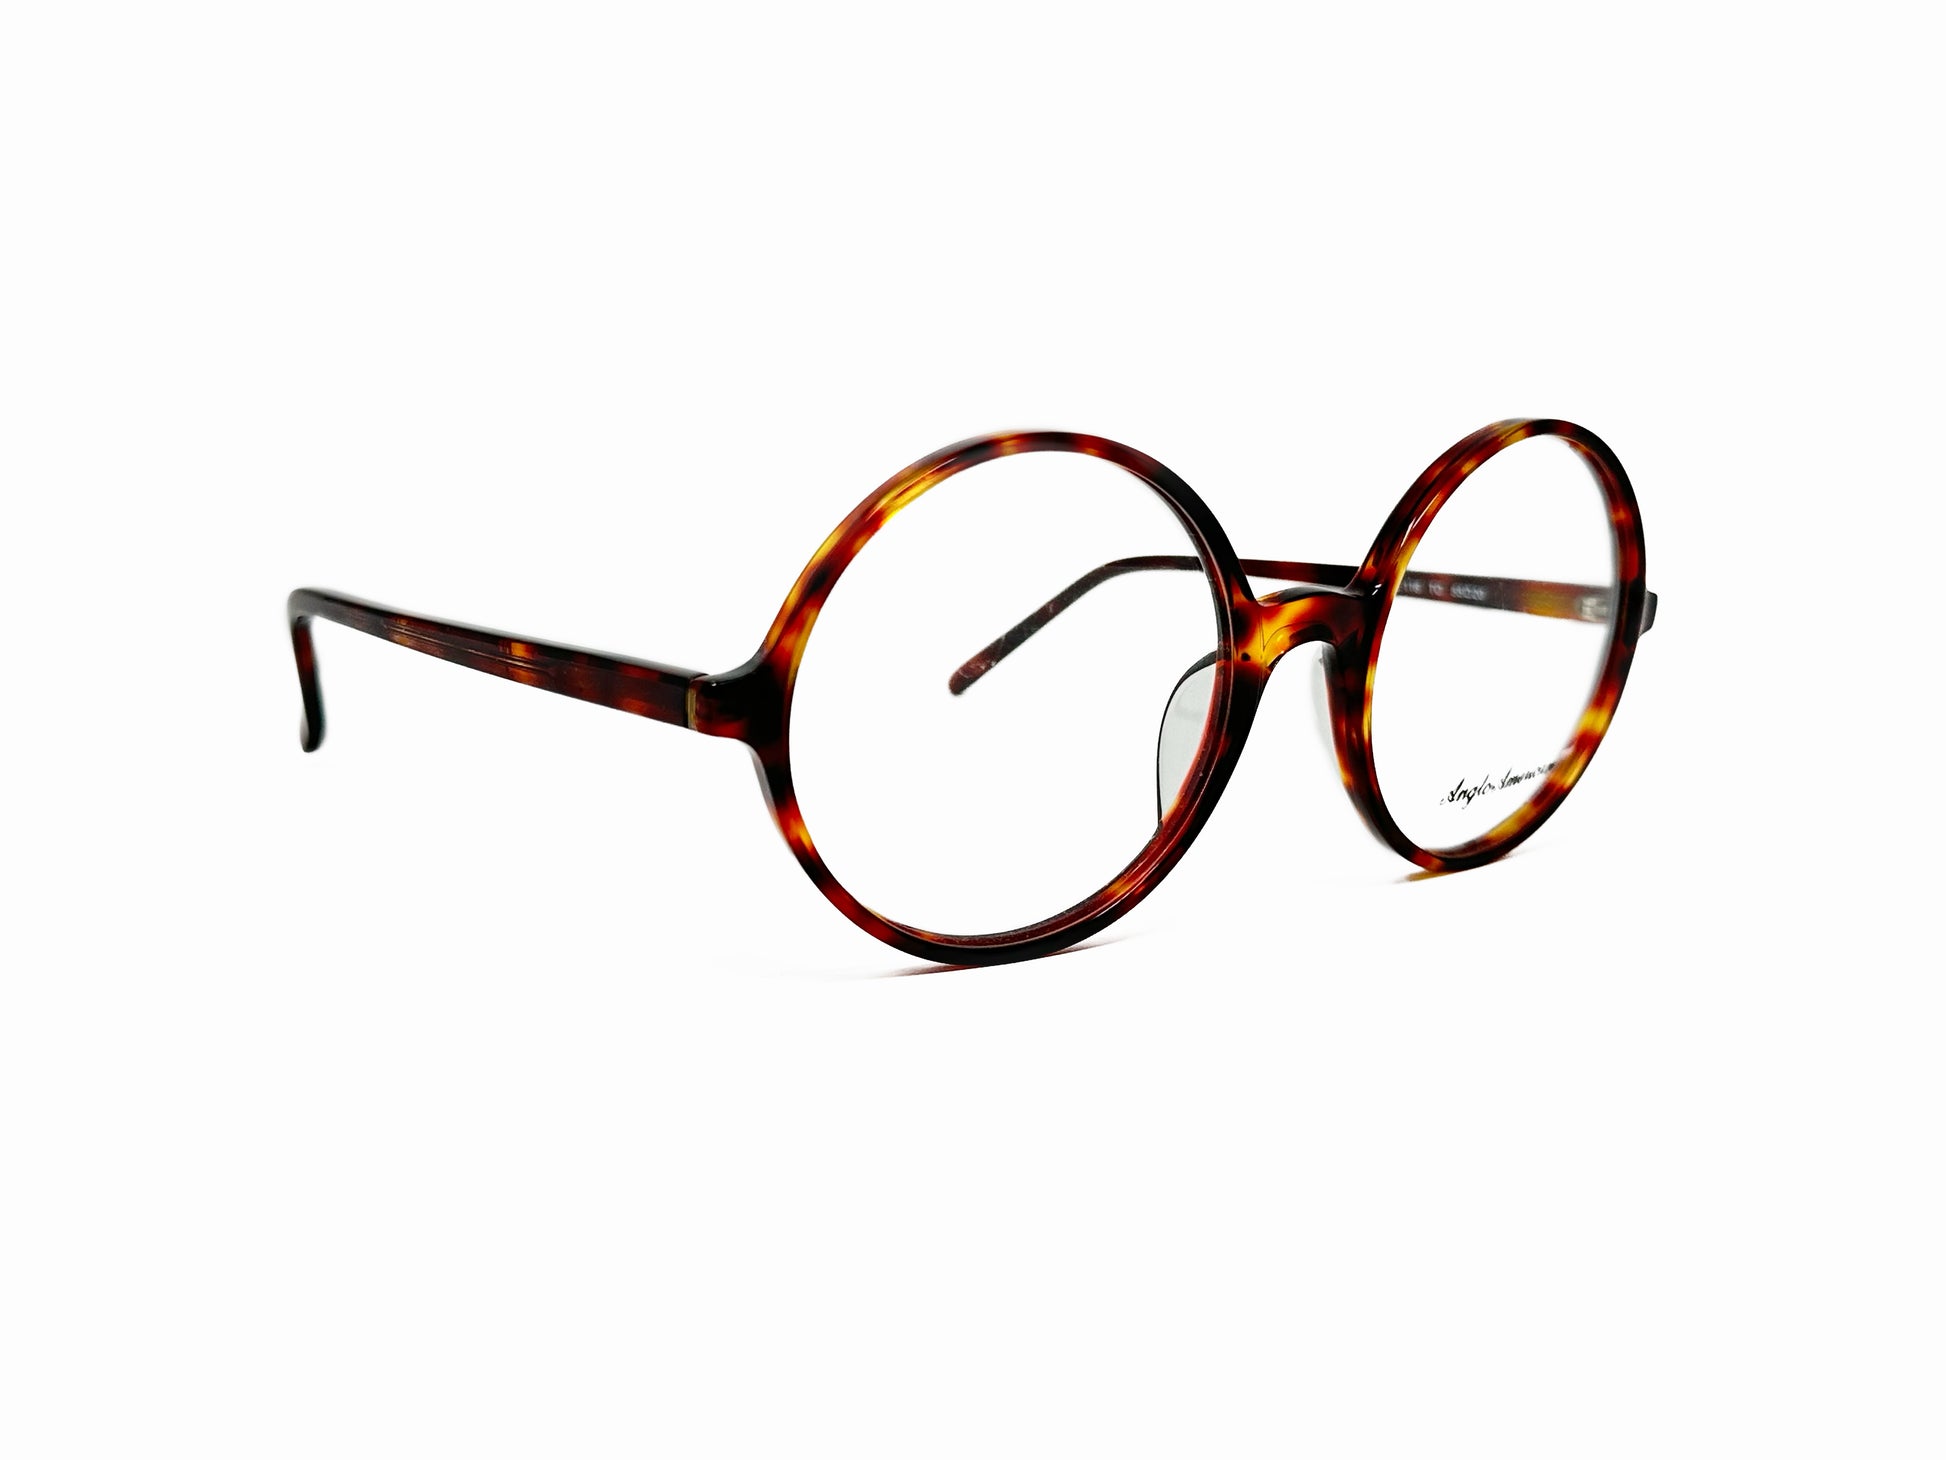 Anglo American Optical round, acetate optical frame. Model: 116. Color: TO - Tortoise. Side view.